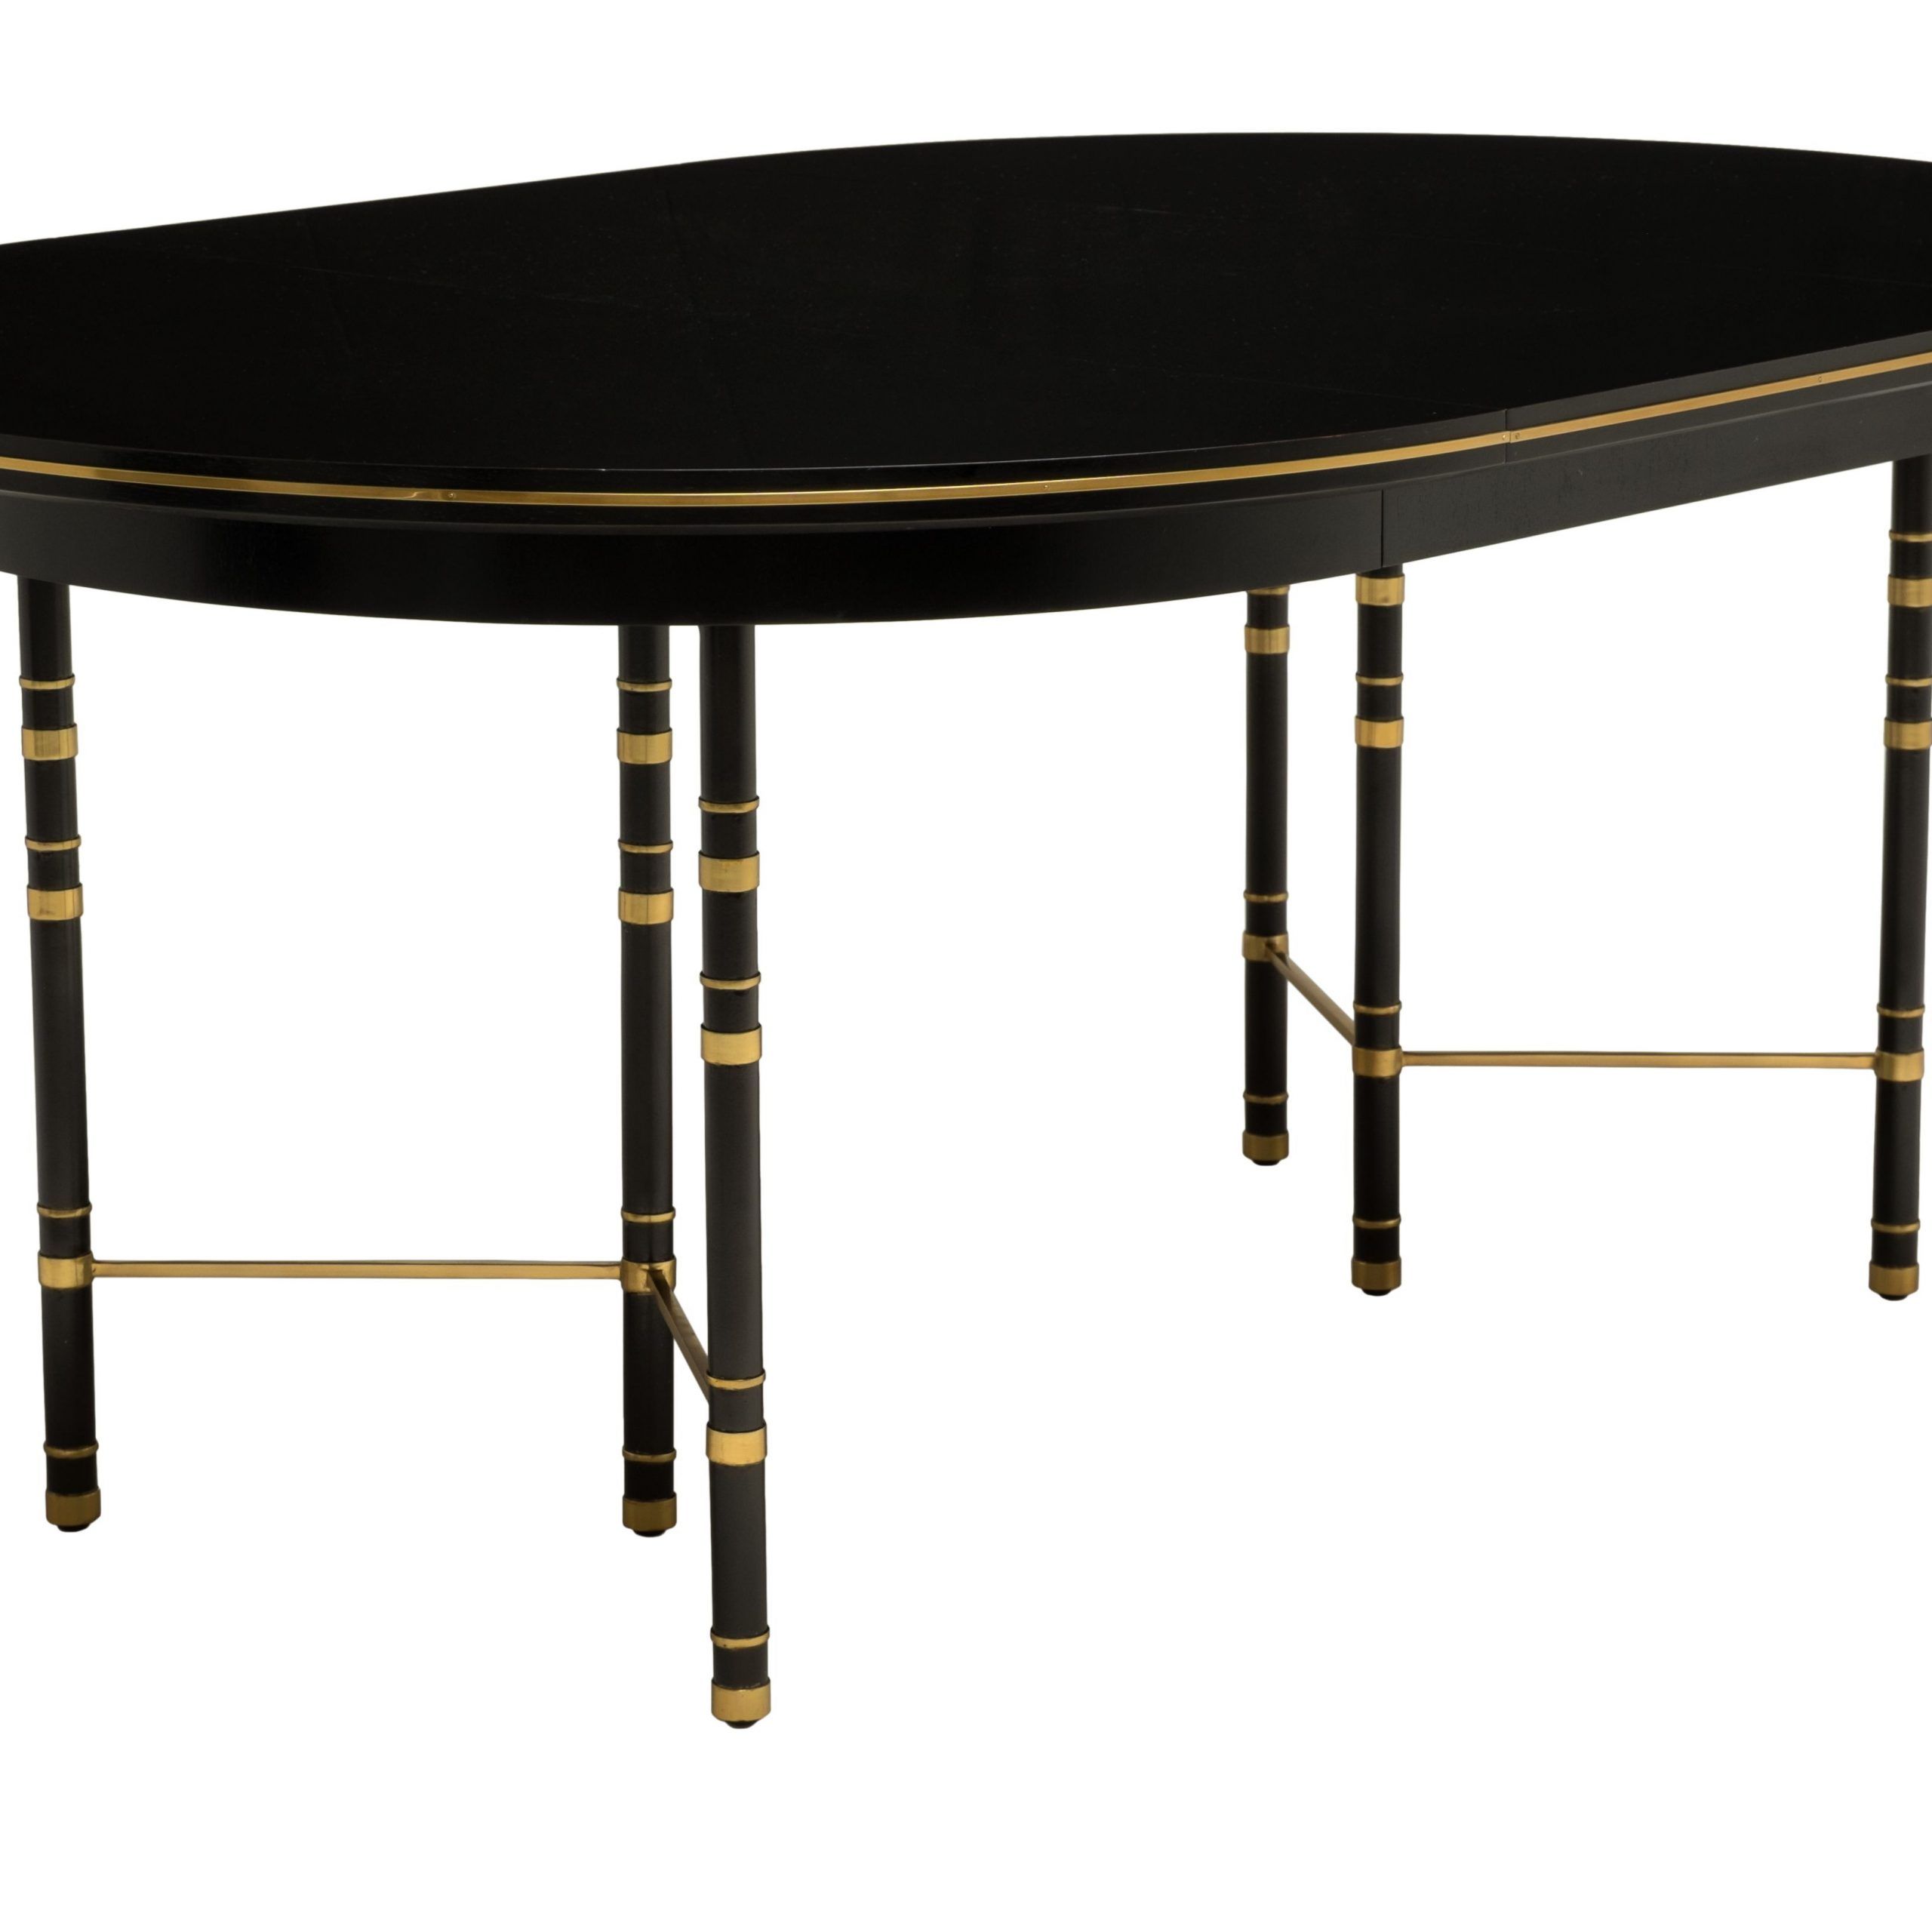 Blair Bistro Tables Within Most Up To Date Blair Dining Table Top Inspiredjansen's Famous Royale (View 2 of 25)